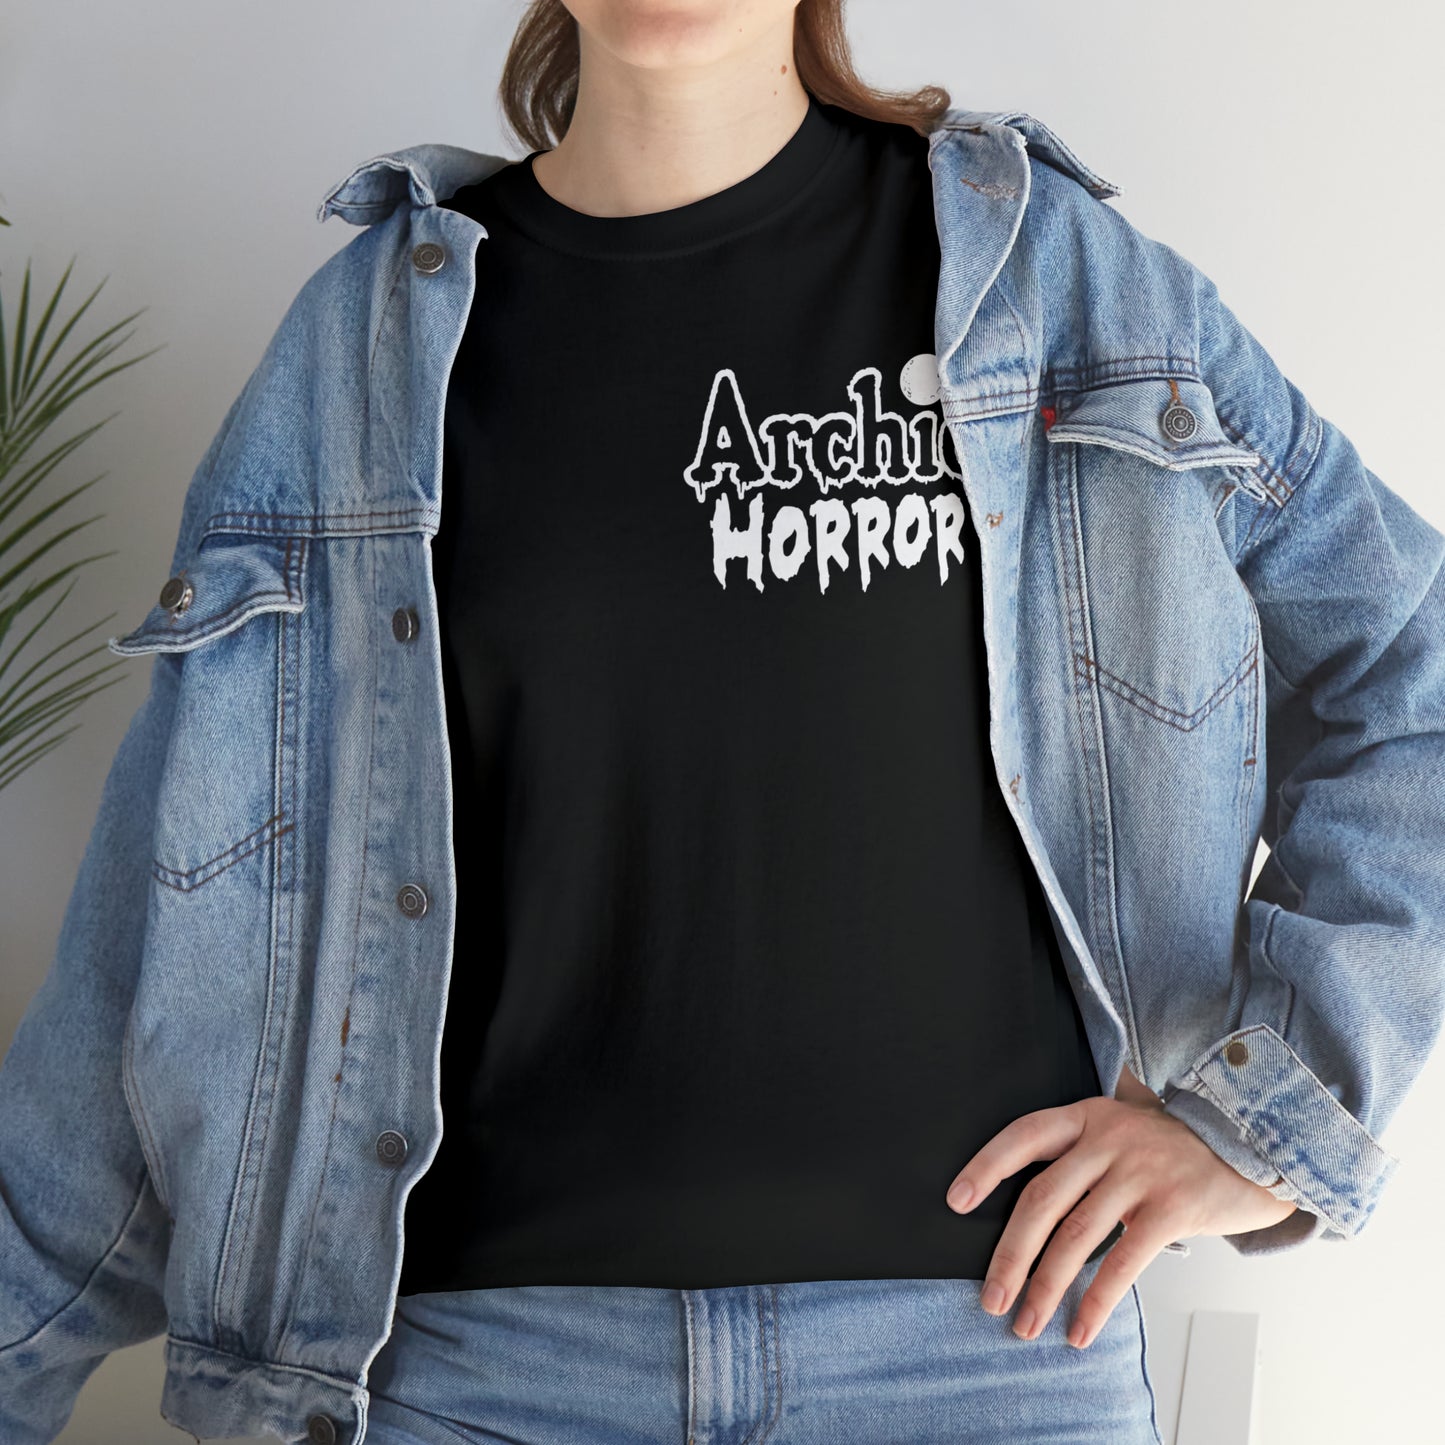 Archie Horror Logo Graphic Tee (Unisex Heavy Cotton Tee) featuring Archie Skull on Back